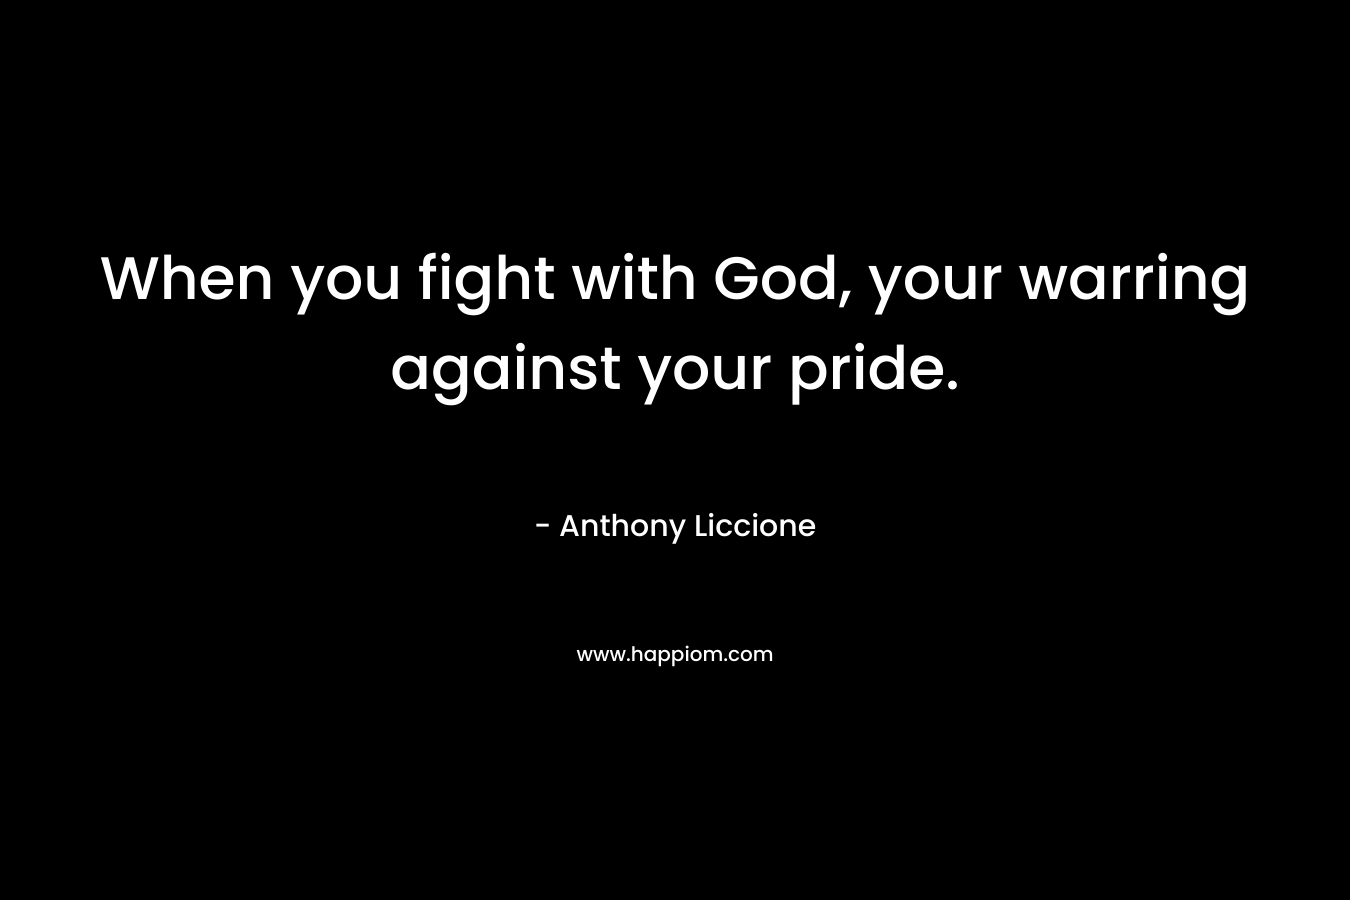 When you fight with God, your warring against your pride. – Anthony Liccione